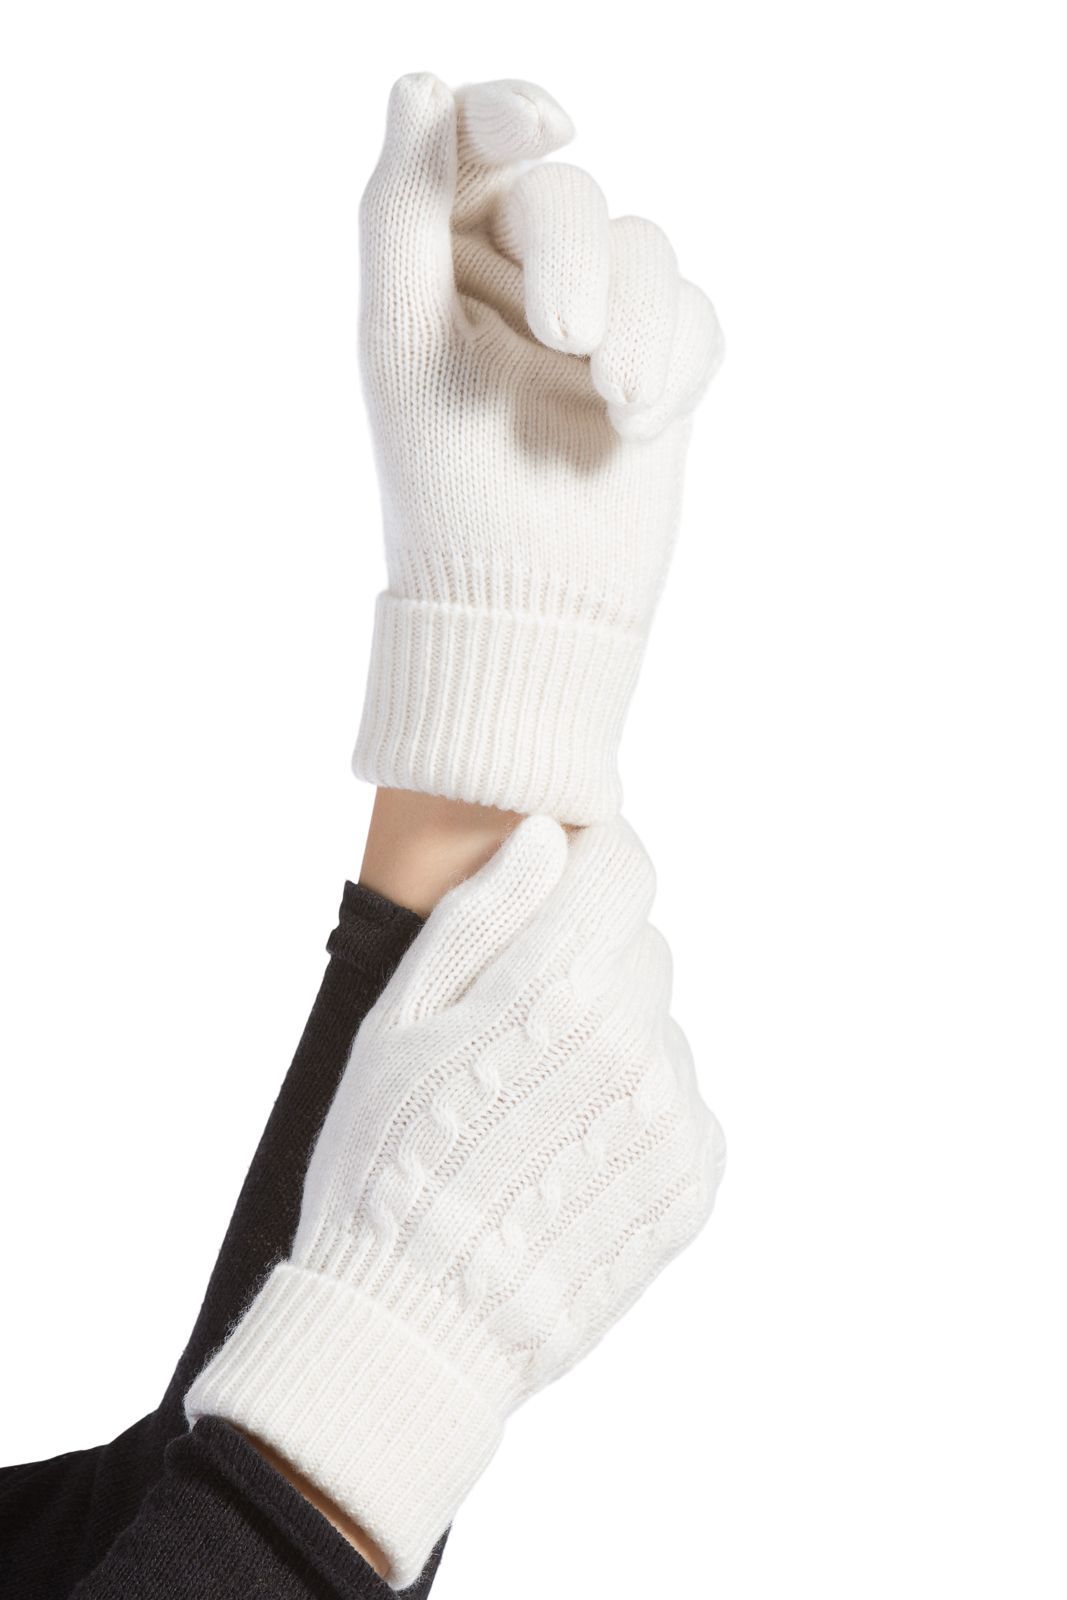 Woman's hands wearing Fishers Finery 100% cashmere cable knit gloves in cream white color